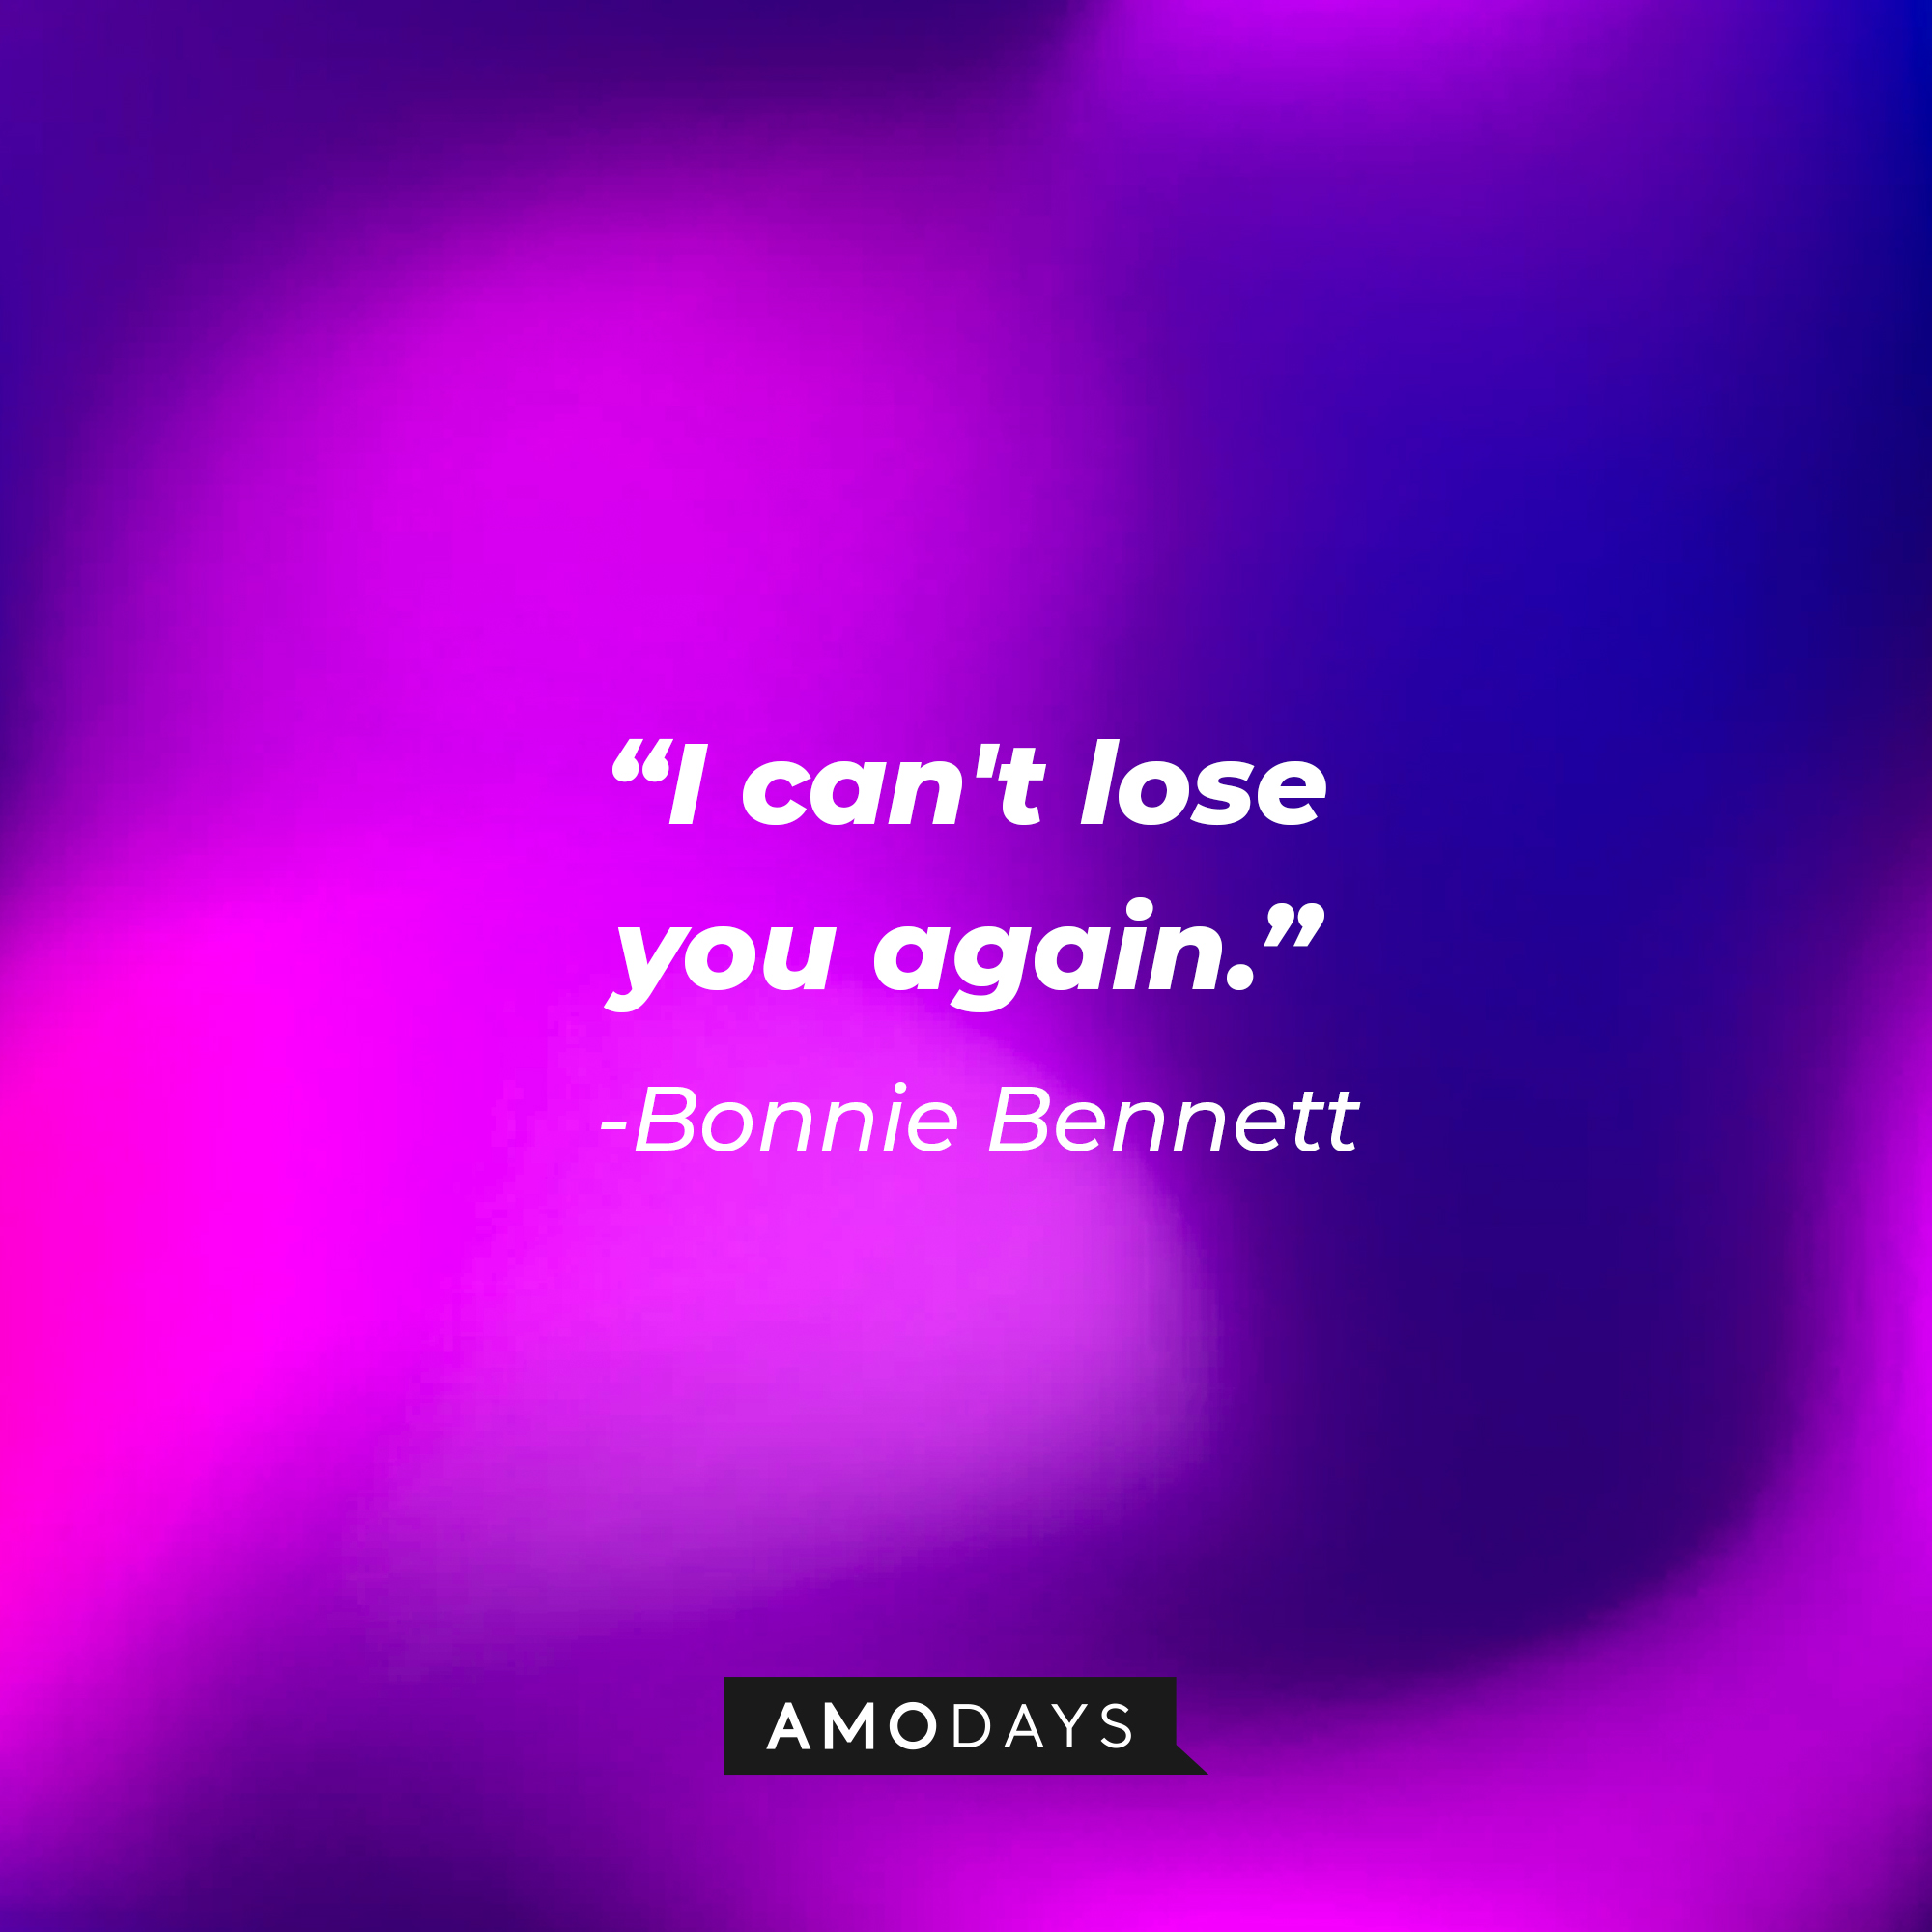 Bonnie Bennett’s quote: “I can't lose you again.” | Source: AmoDays